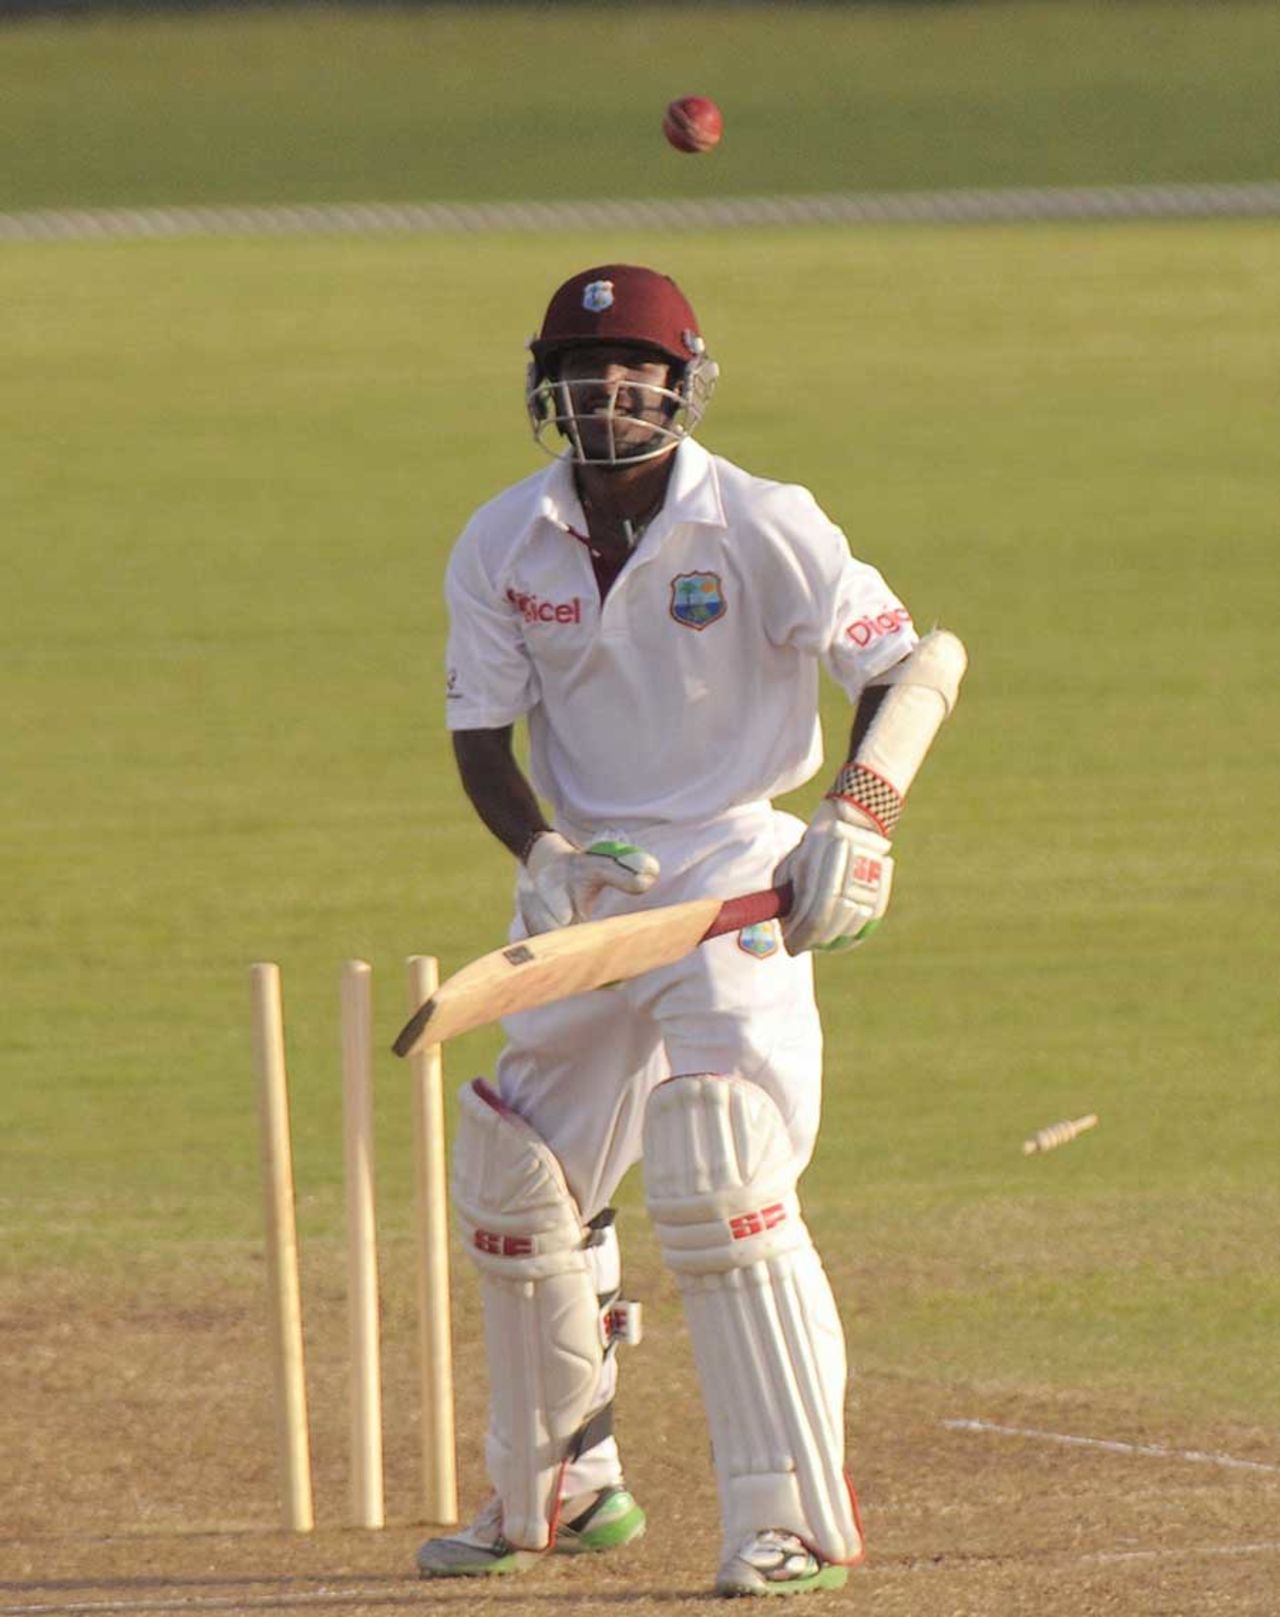 Veerasammy Permaul was bowled for 36, West Indies A v India A, 2nd unofficial Test, St Vincent, 1st day, June 9, 2012